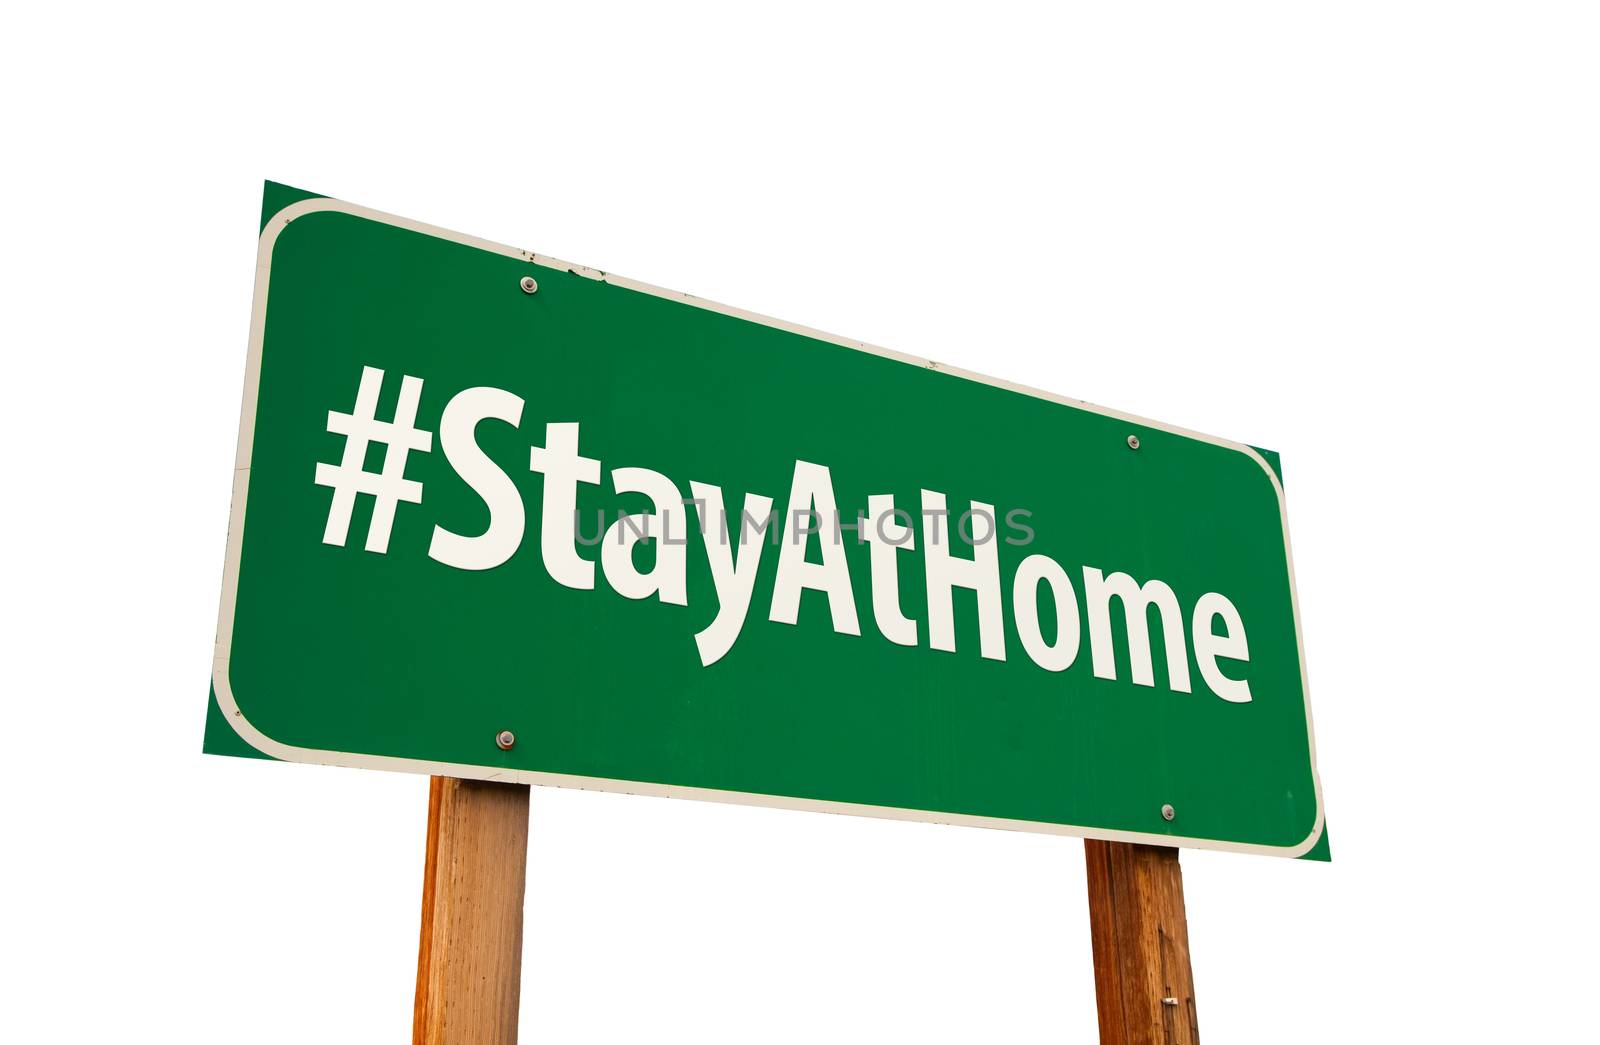 #Stay At Home Green Road Sign Isolated On A White Background.